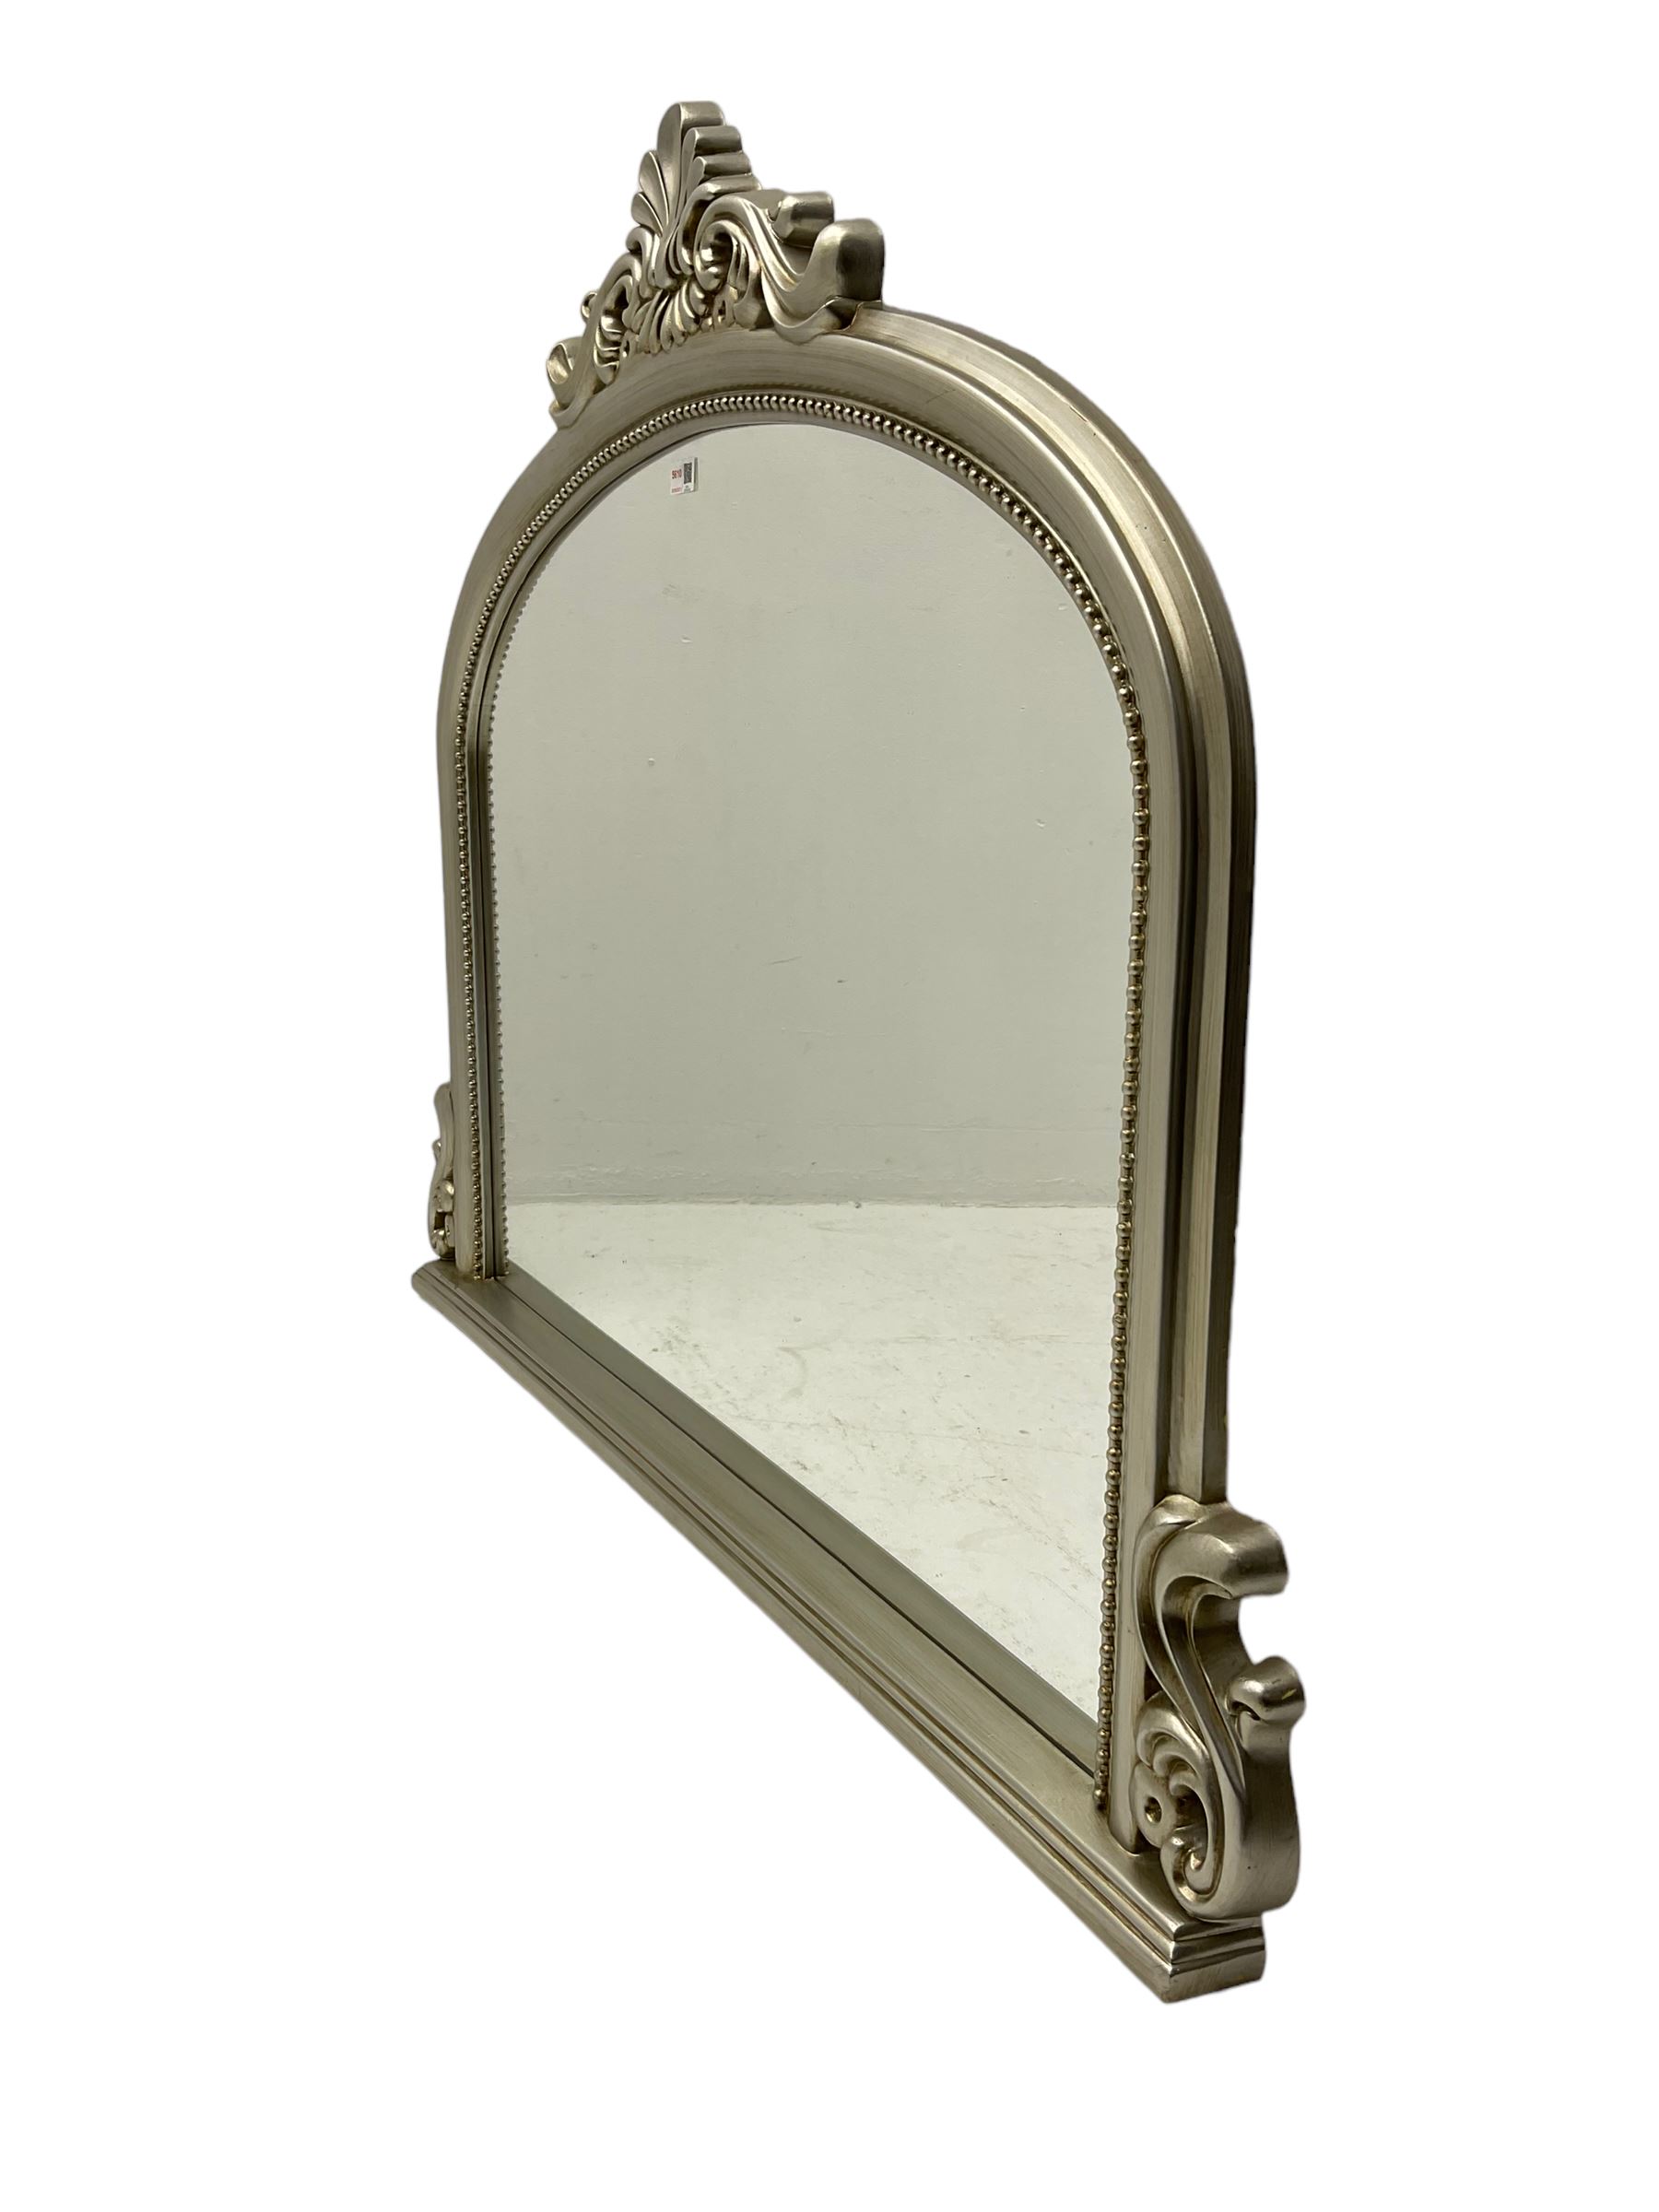 Arch top overmantle mirror in silvered frame - Image 2 of 2